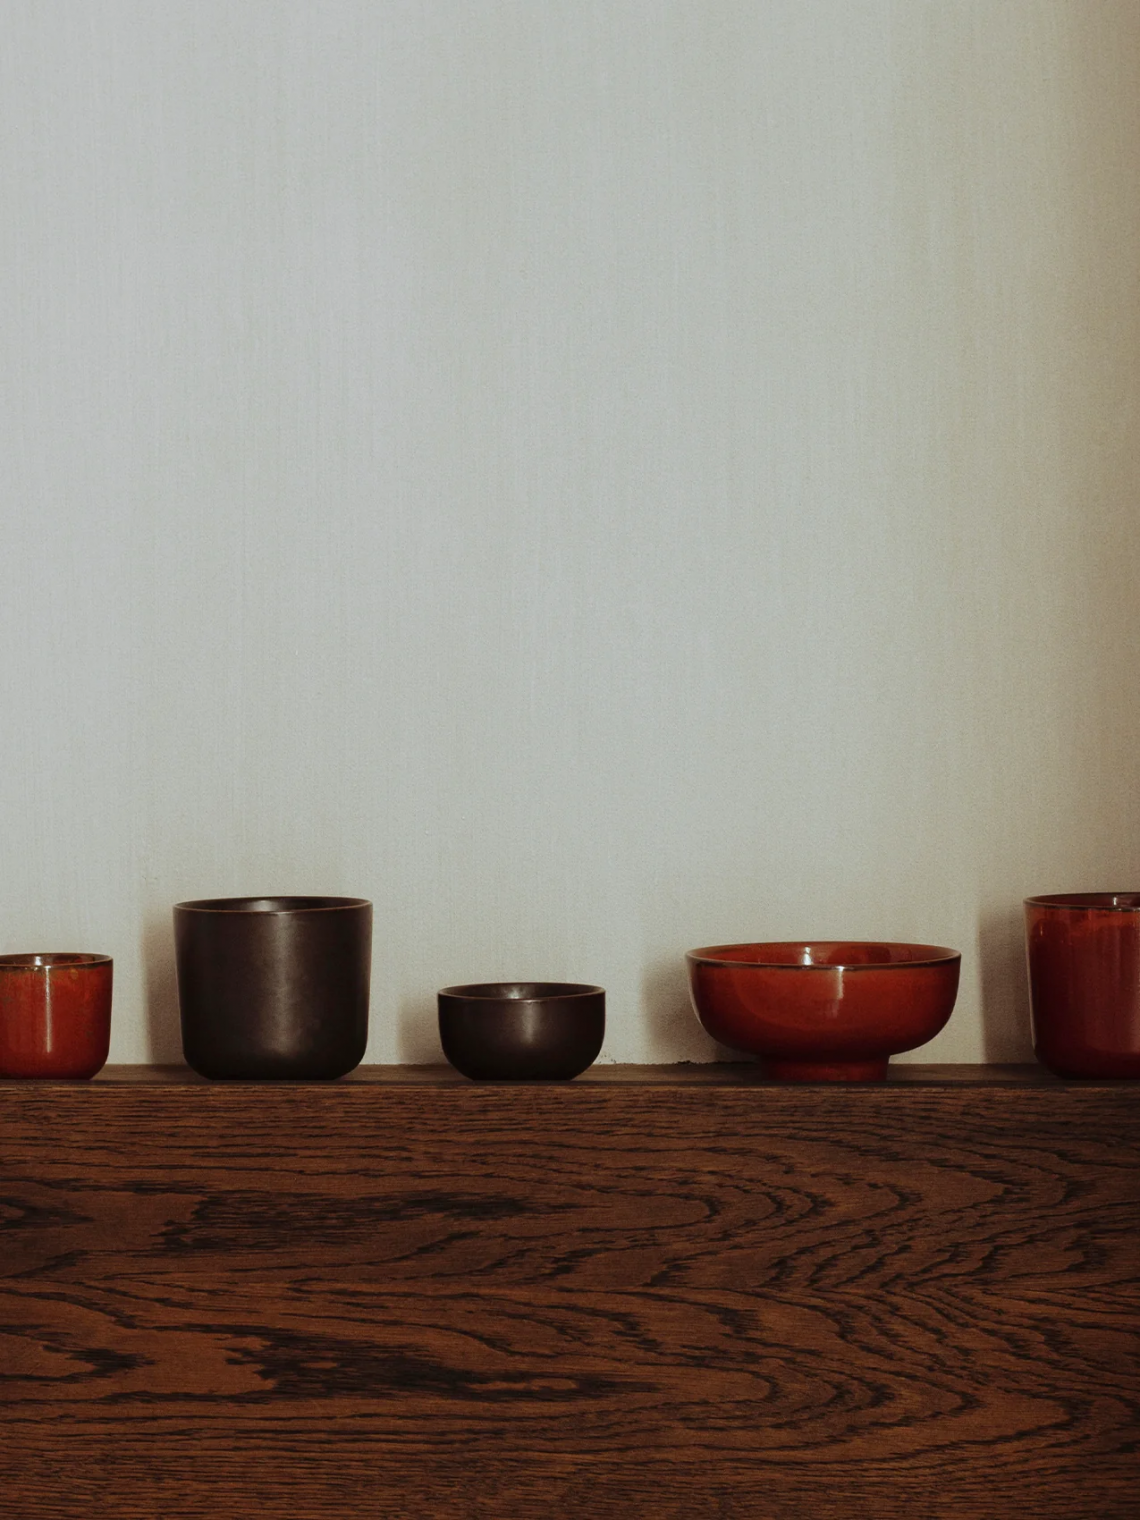 New Norm Footed Bowl碗场景图1